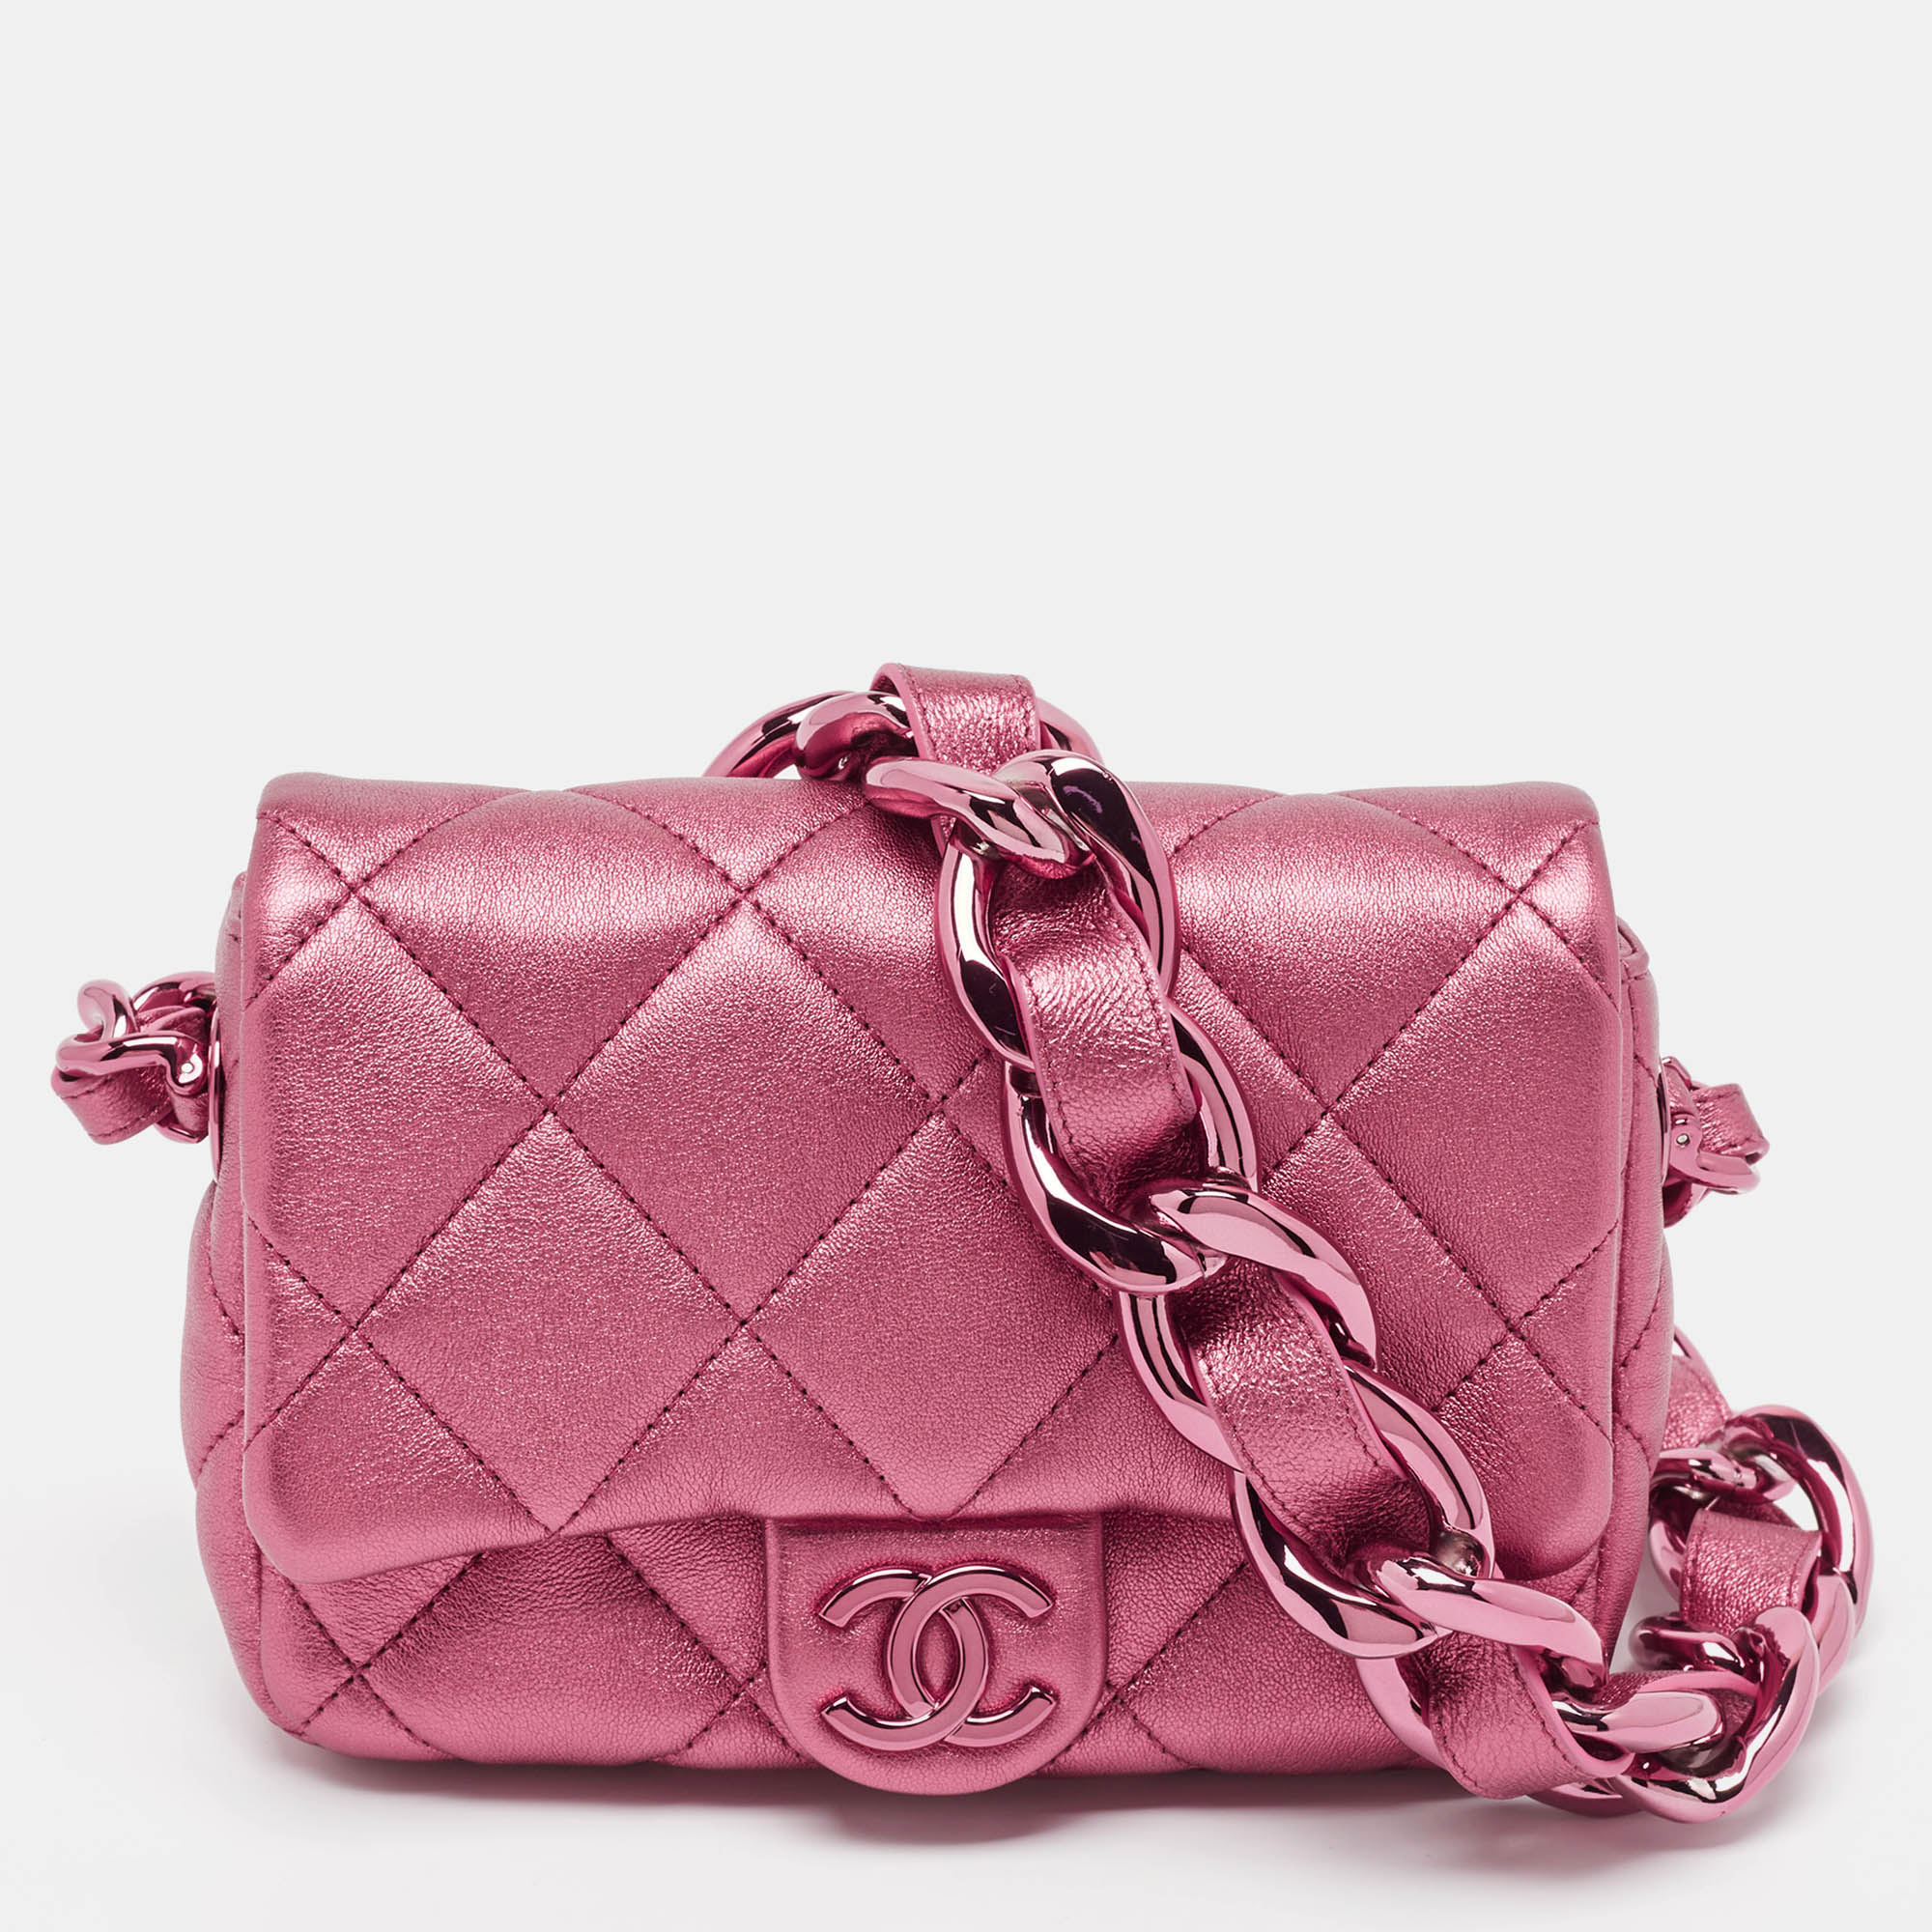 

Chanel Metallic Pink Quilted Leather Mini Flap Bag